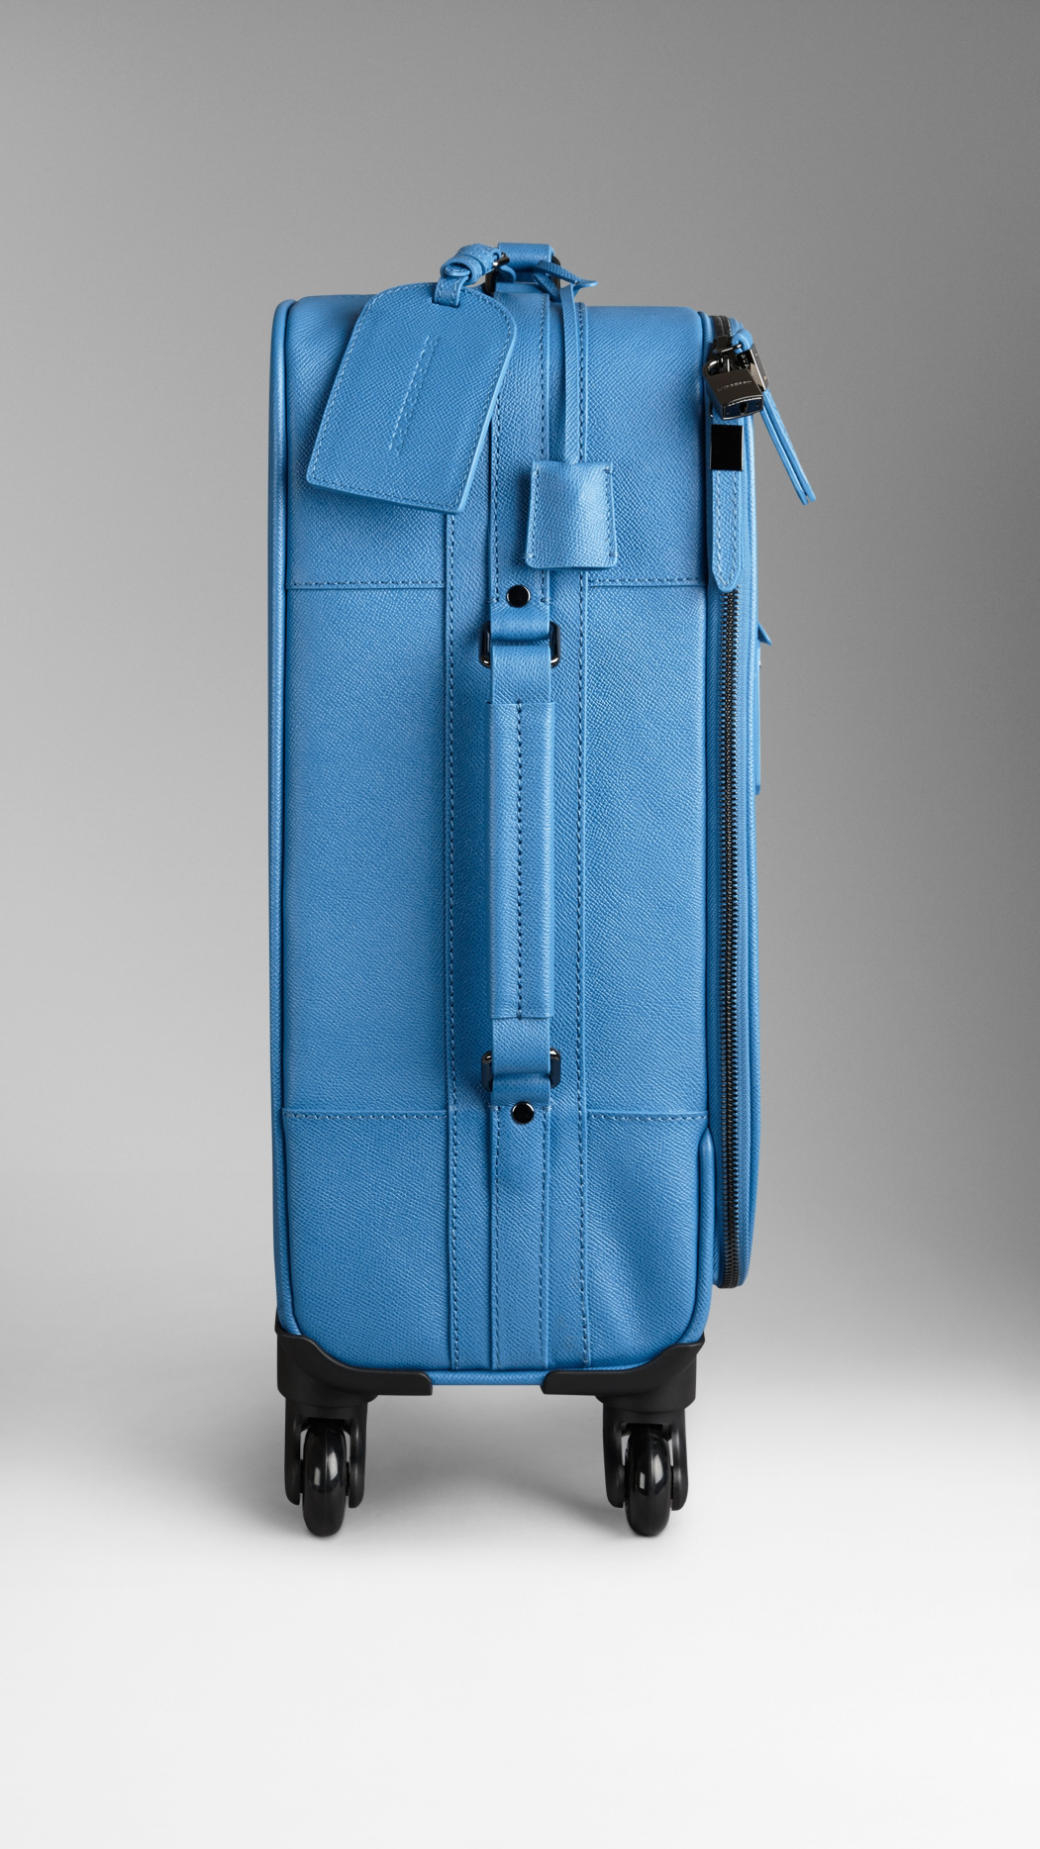 Burberry London Leather Four-Wheel Suitcase in Blue for Men - Lyst